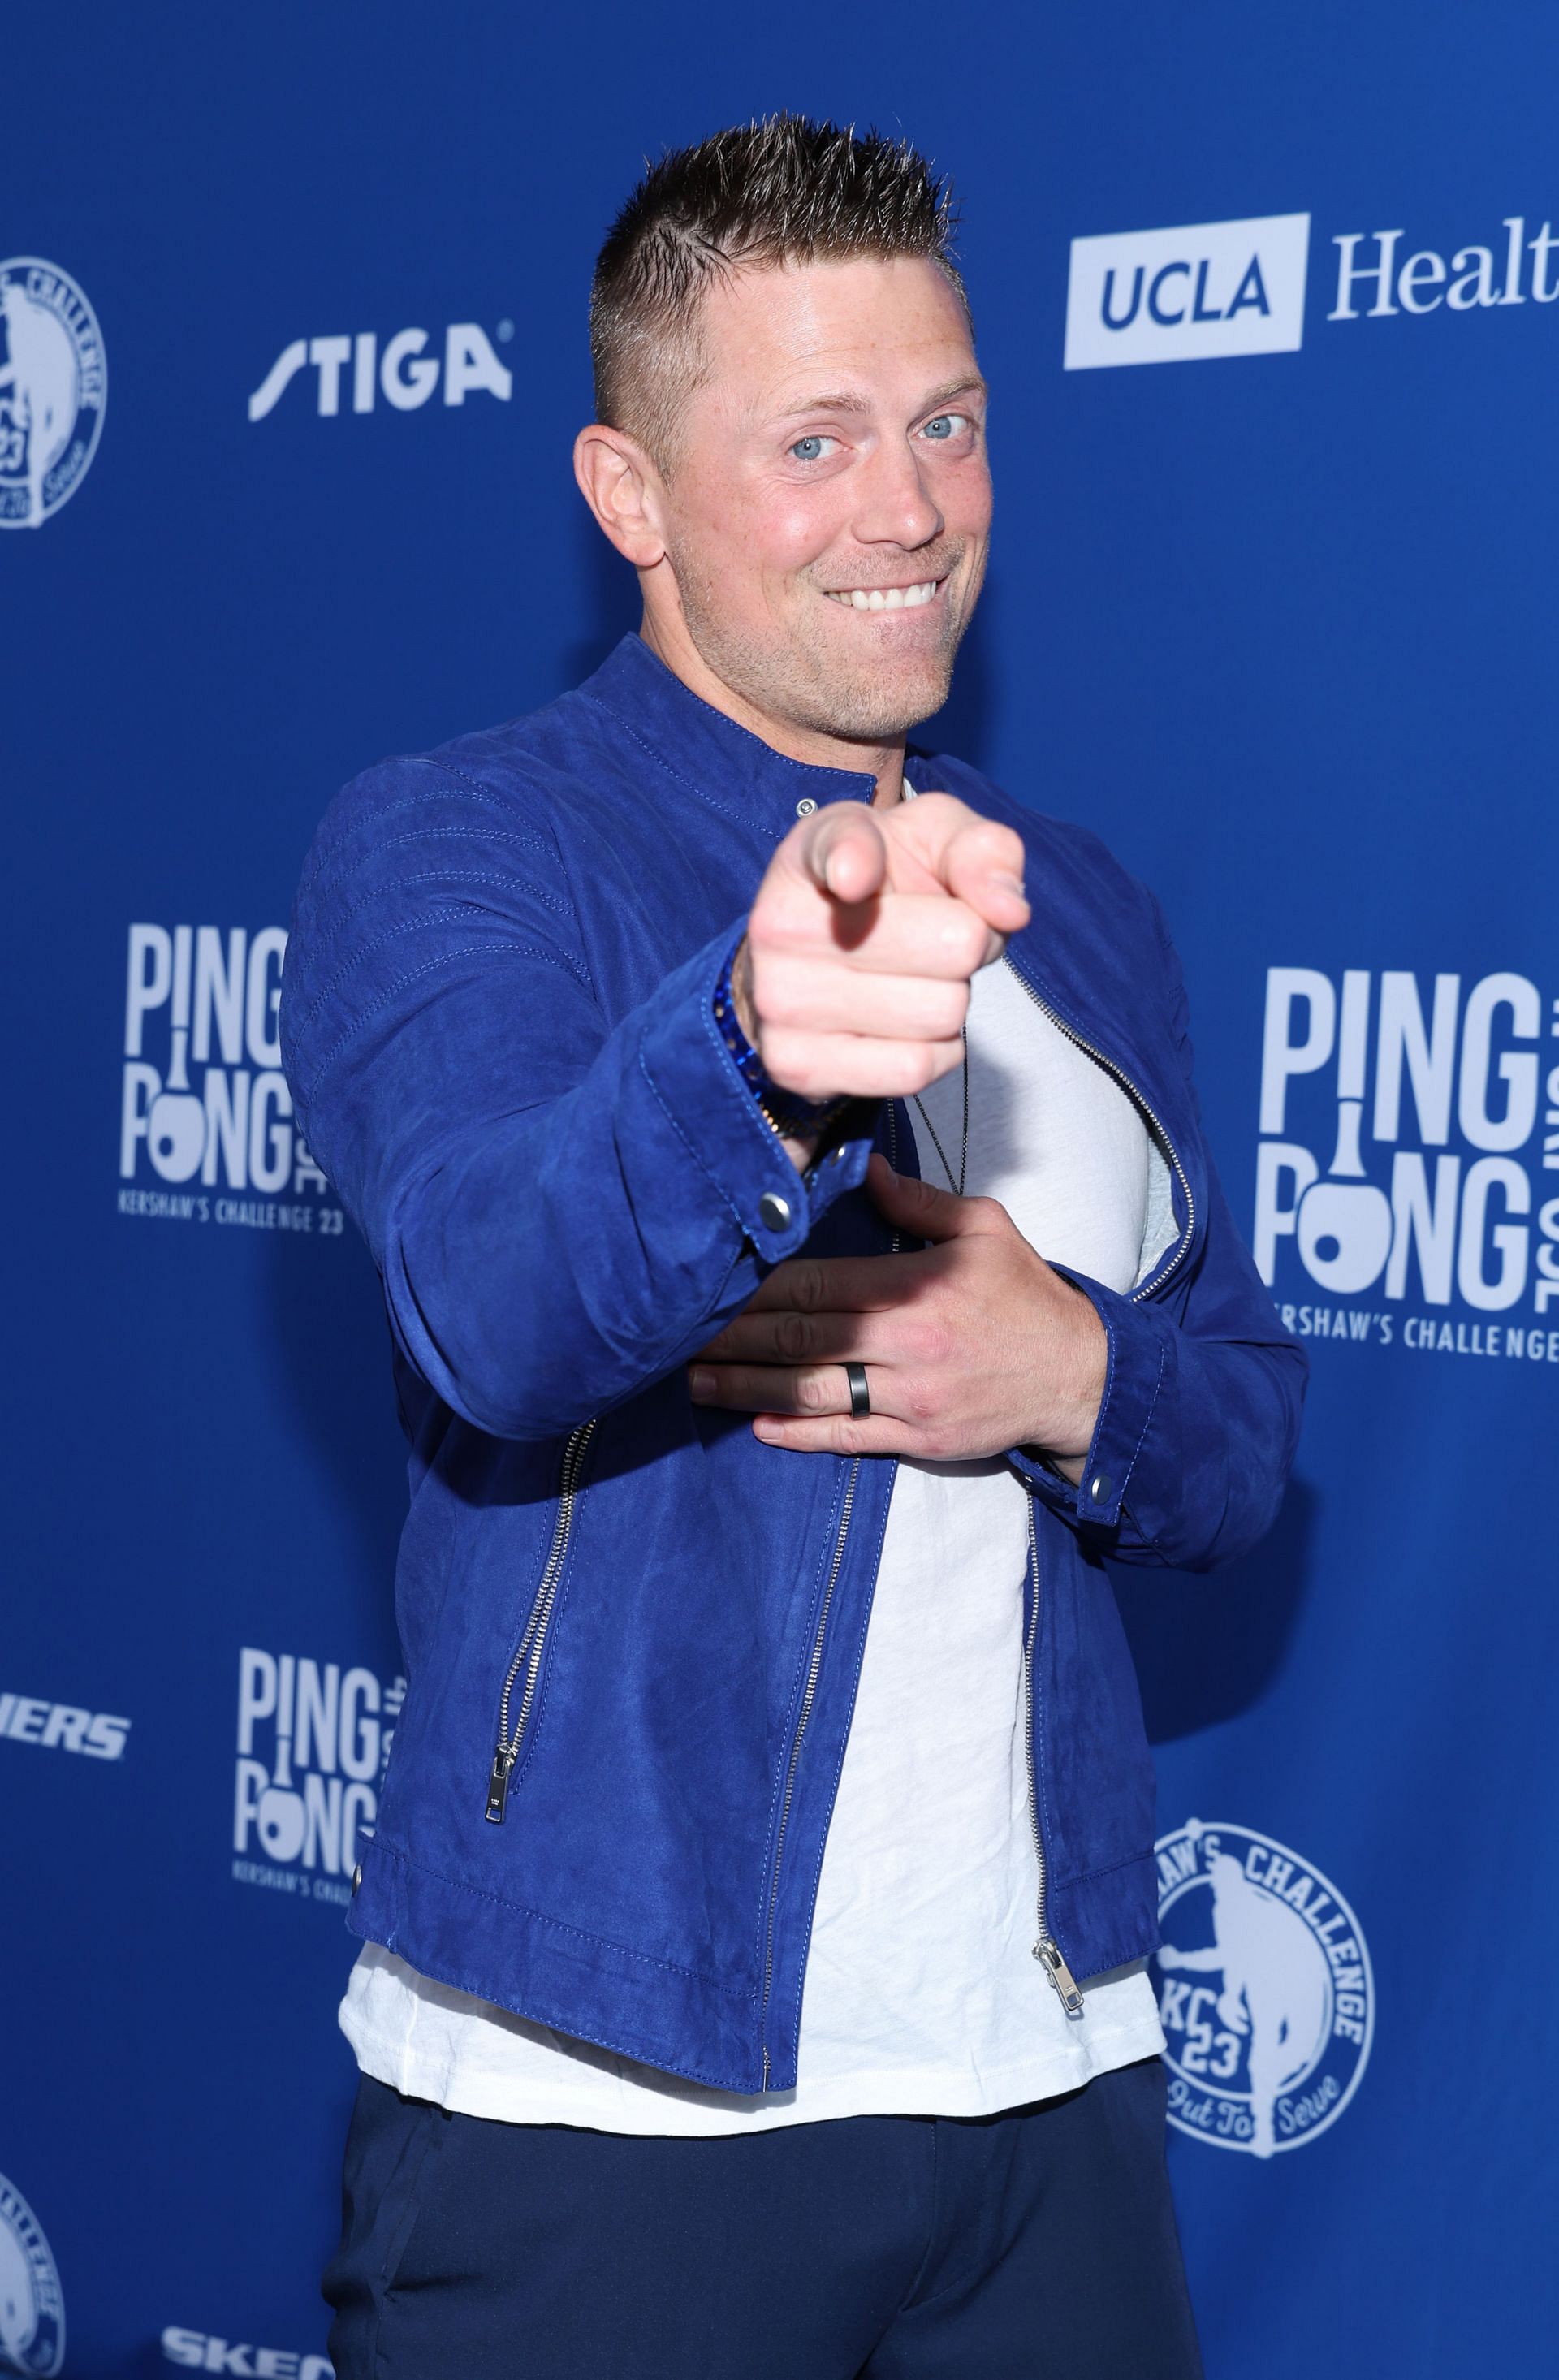 Ping Pong 4 Purpose 2023 at Dodger Stadium presented by Skechers and UCLA Health